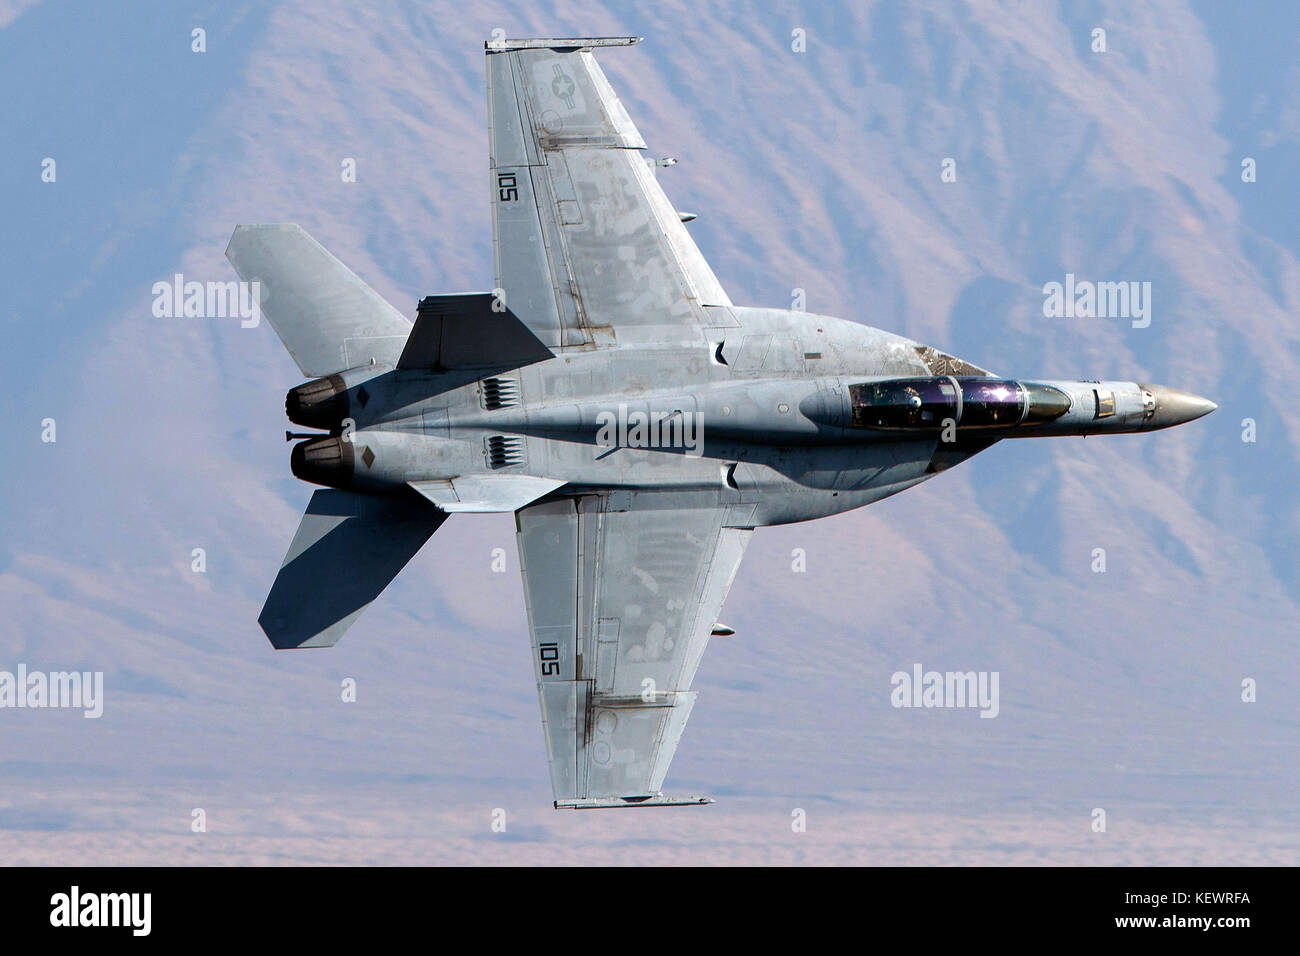 United States Navy Boeing F/A-18F Super Hornet (NE 105) from the VFA-2 Bounty Hunters squadron, Naval Air Station Lemoore, flies low level on the Jedi Transition through Star Wars Canyon / Rainbow Canyon, Death Valley National Park, Panamint Springs, California, United States of America Stock Photo